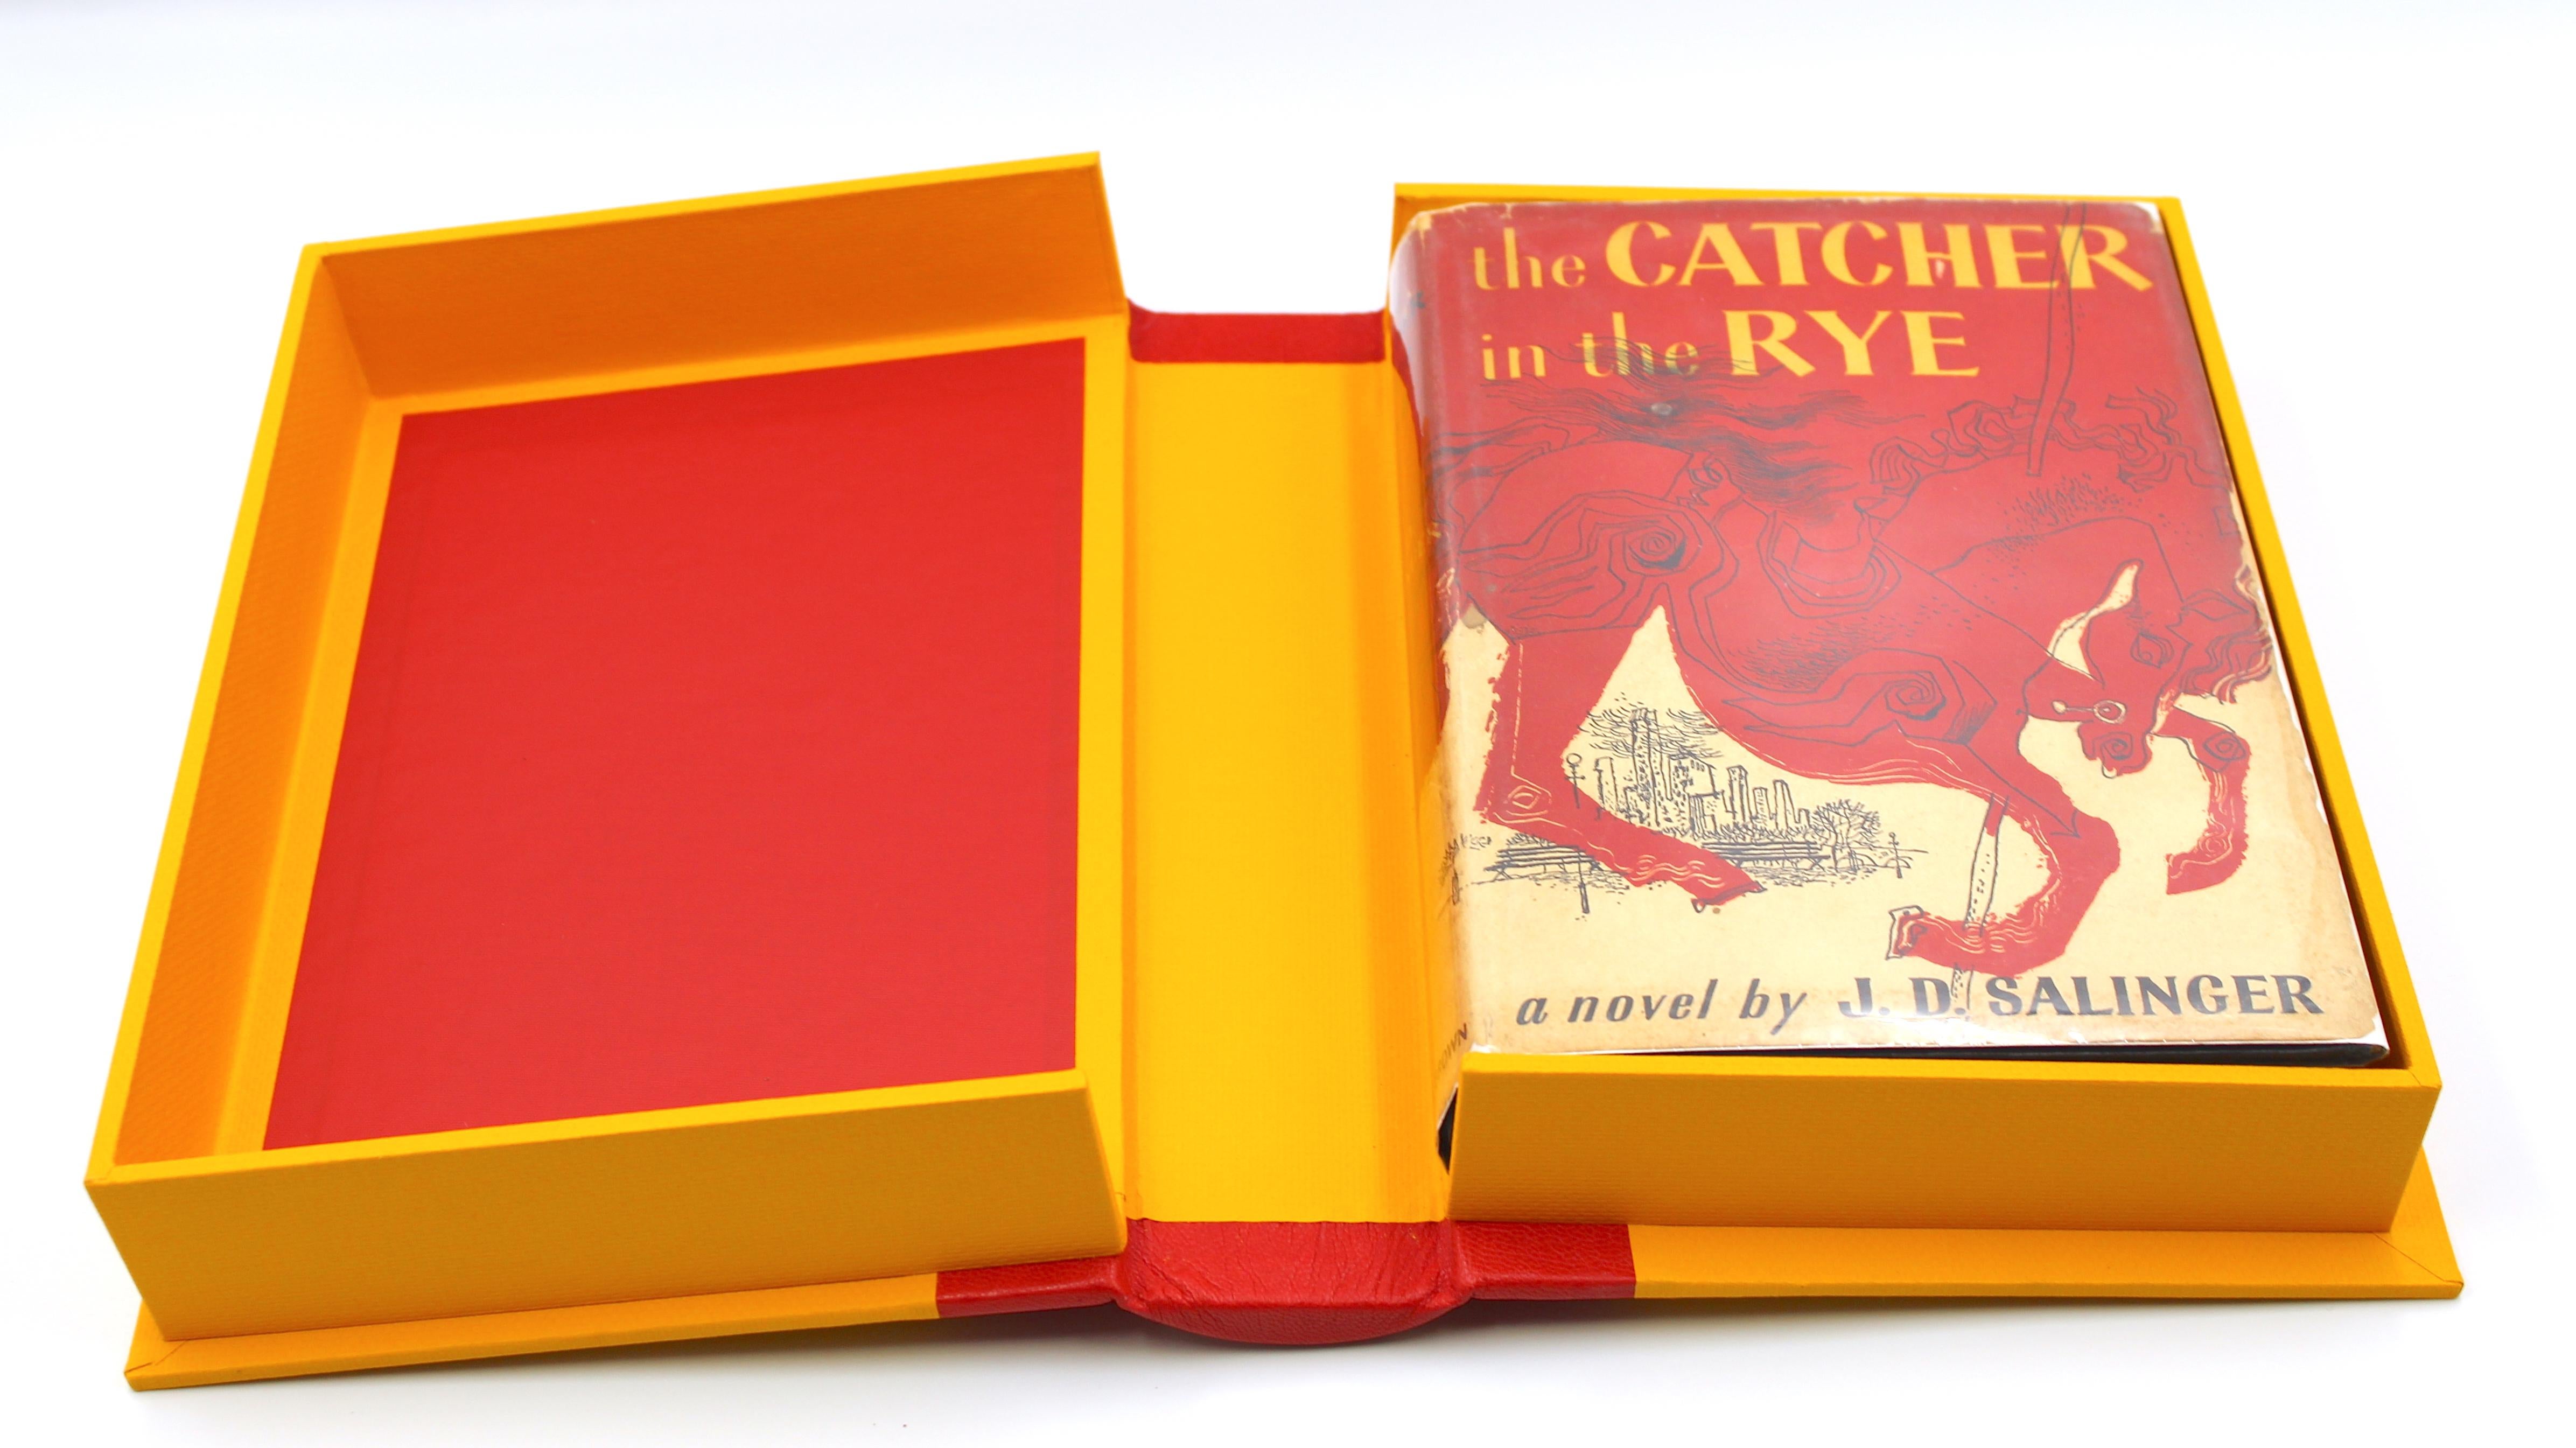 Catcher in the Rye by J.D. Salinger, First Edition, in Dust Jacket, 1951 5